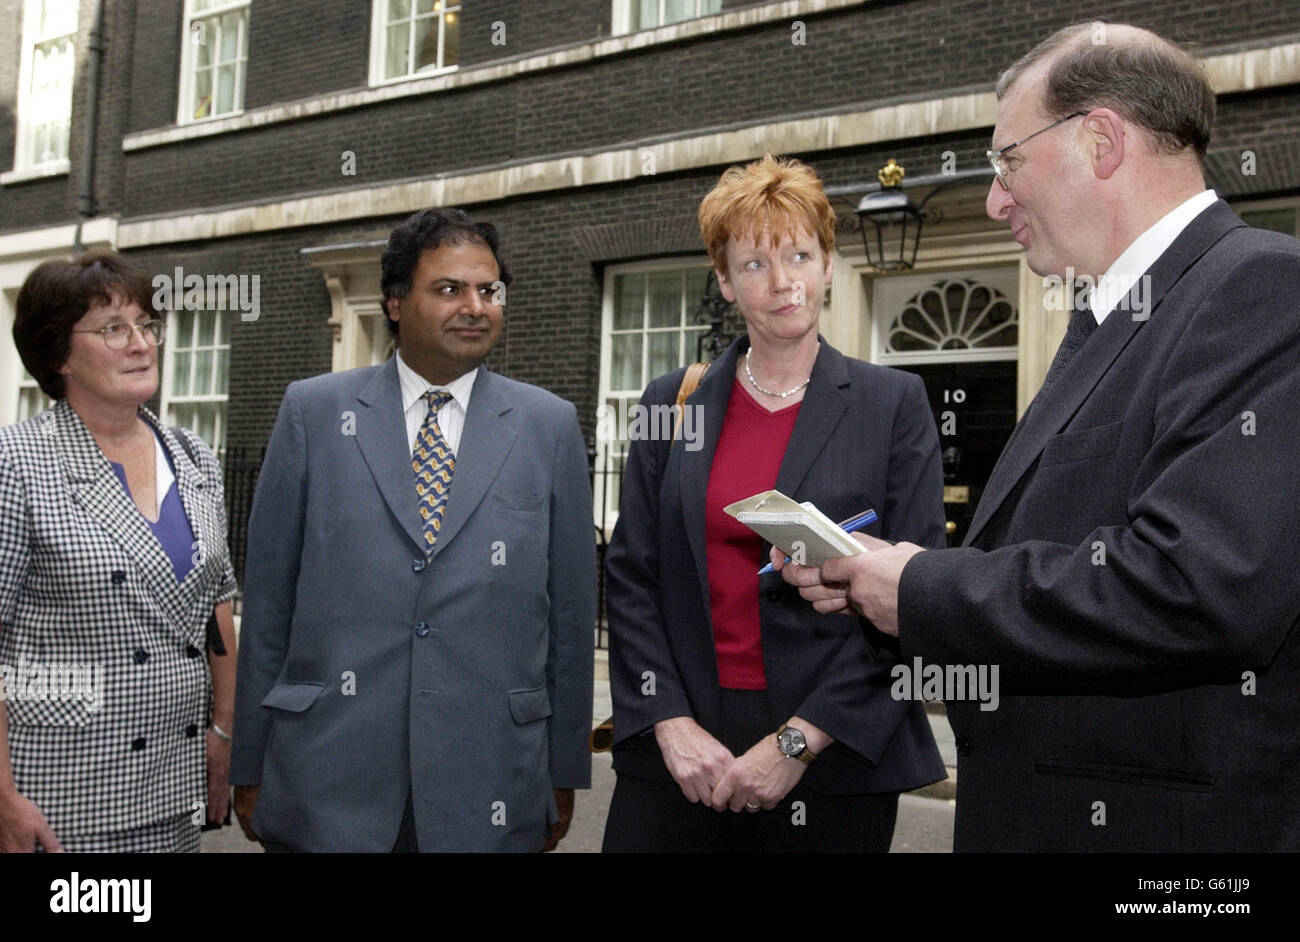 Teeside MP's Dari Taylor (left), Ashok Kumar (centre) and Vera Baird (right) are interviewed by the Evening Gazette's Parliamementary correspondant Bill Doult after handing in a petition containing the signatures of 3700 people from the Teeside area. * ... at No.10 Downing Street, London. The MP's presesented the petition, which called for tighter controls of air guns, (including the banning of ownership by youngsters), with a personal letter from the parents of Matthew Sheffield, a 14-year-old from Eaglescliffe, who was tragically killed when accidently shot with an air gun by a close friend. Stock Photo